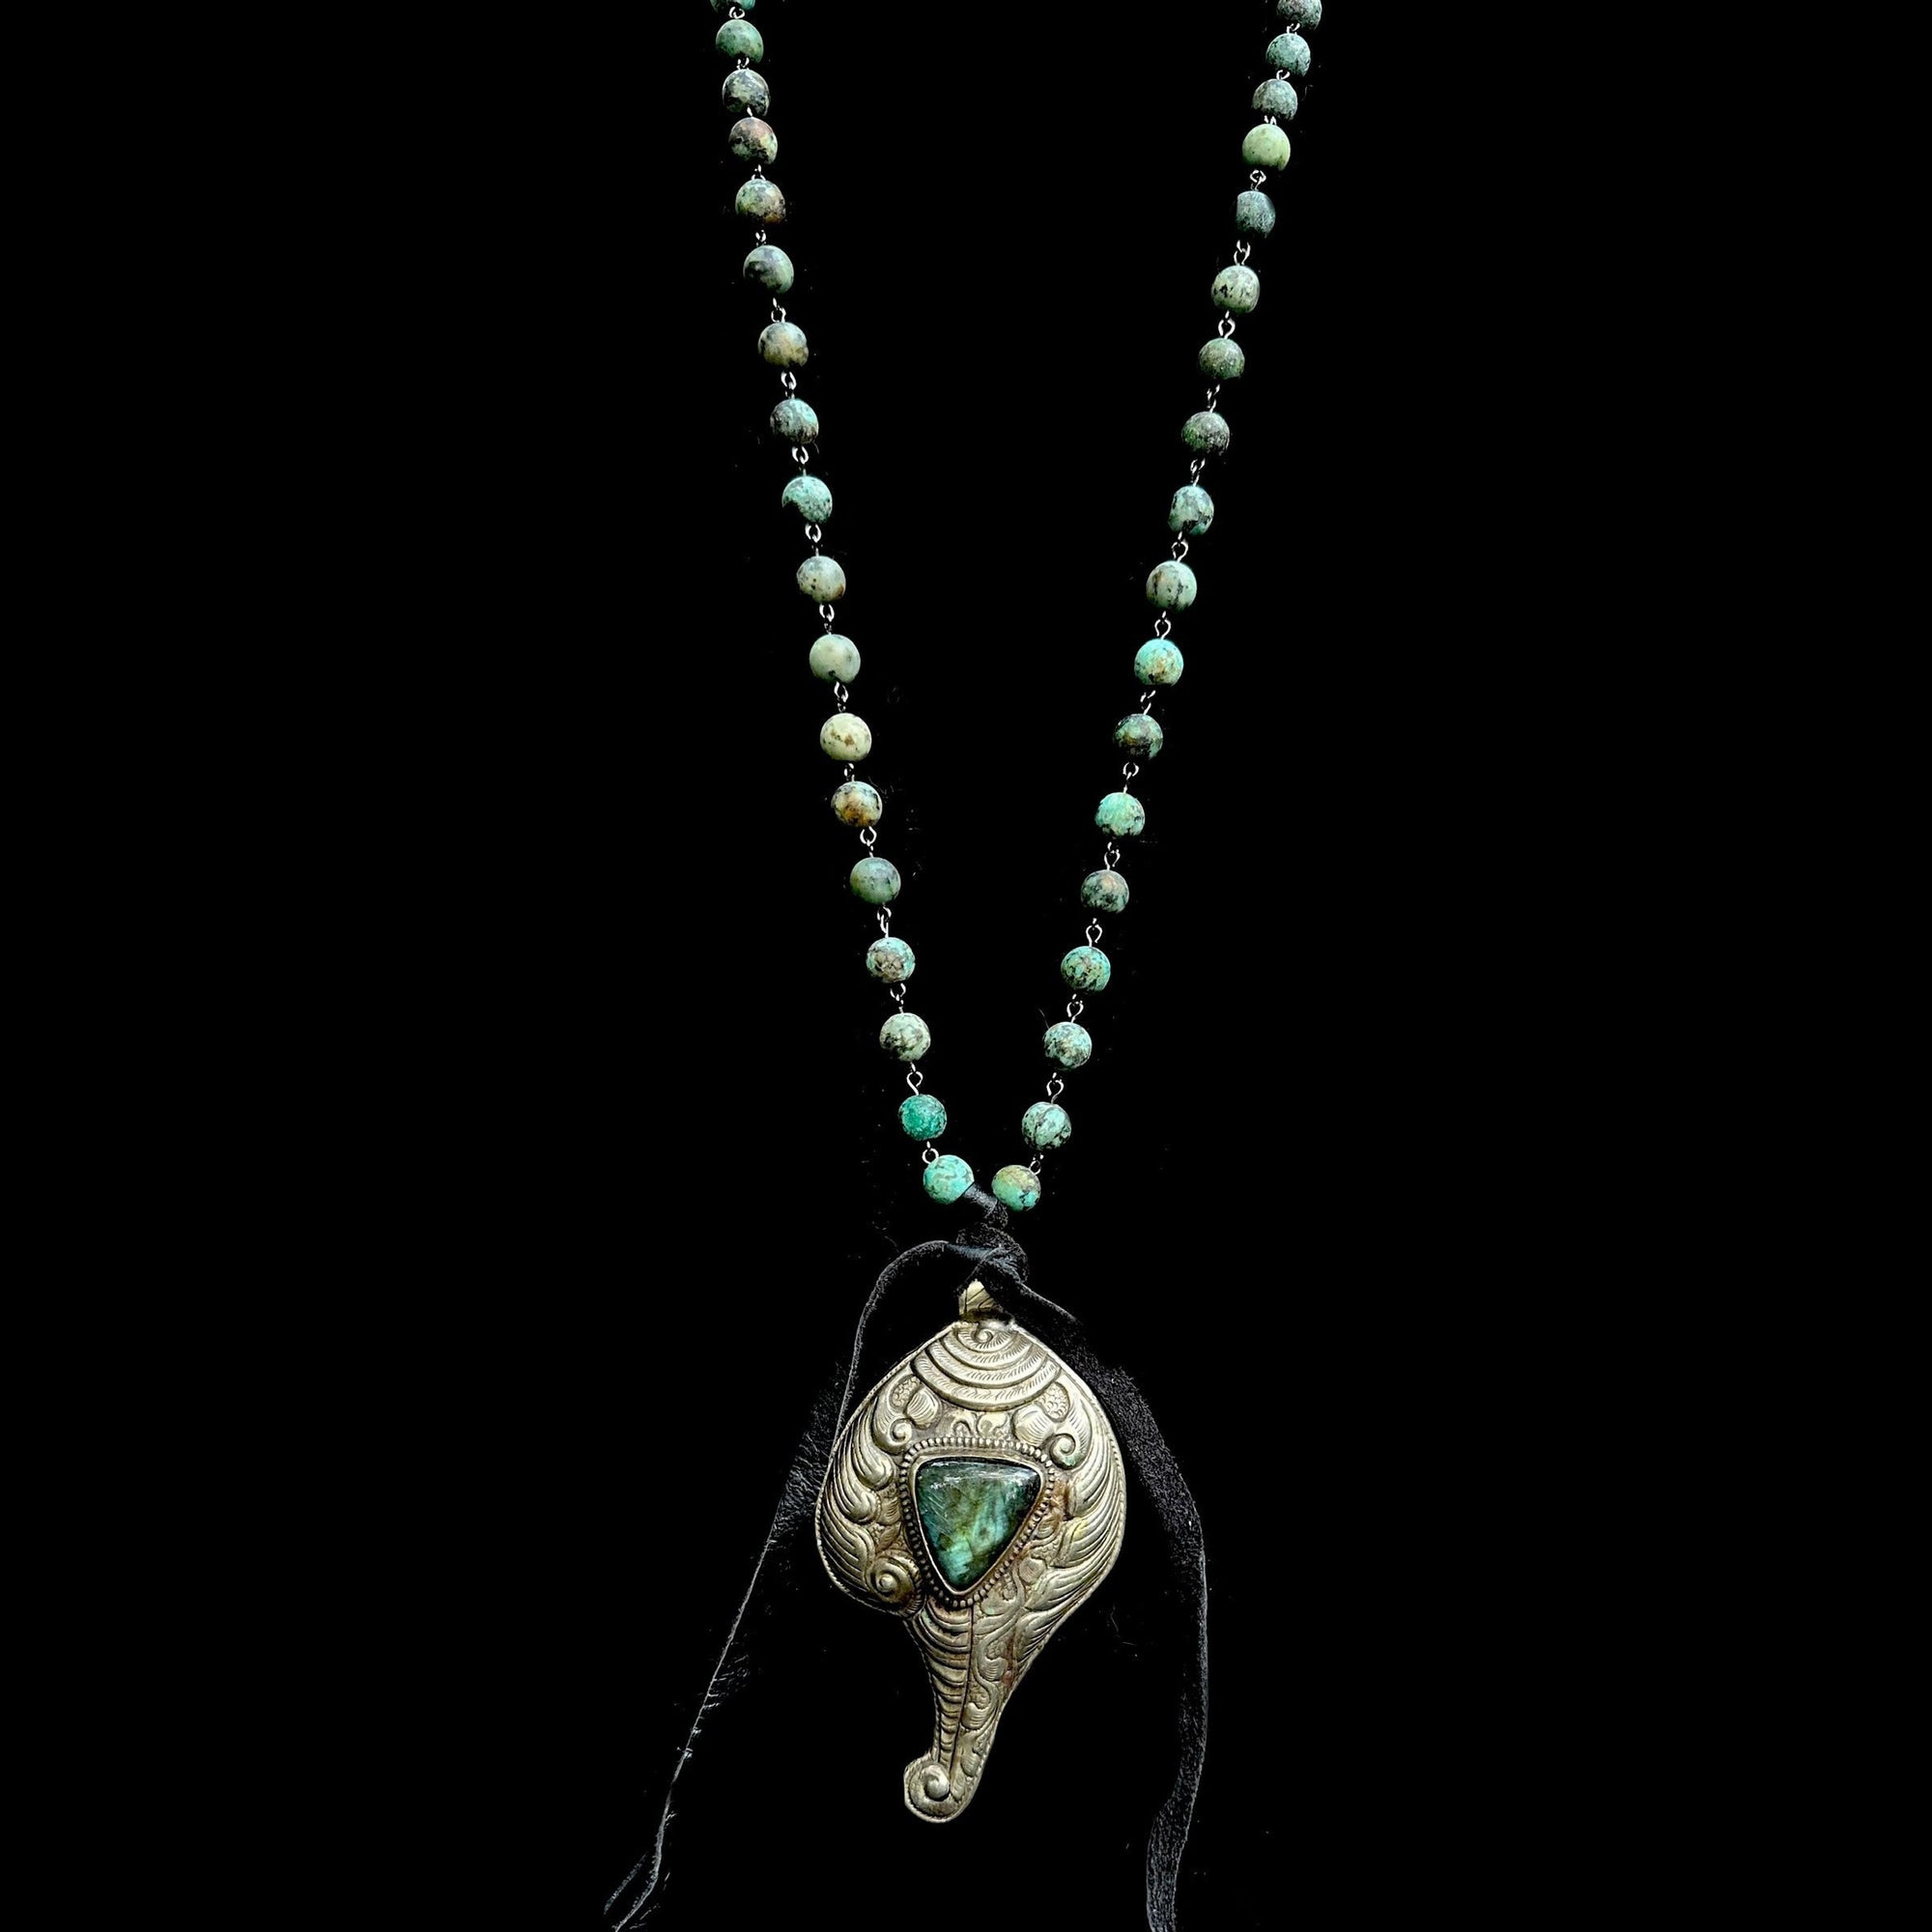 One of a Kind Auspicious Conch Repousse Silver Pendant with African Turquoise Necklace